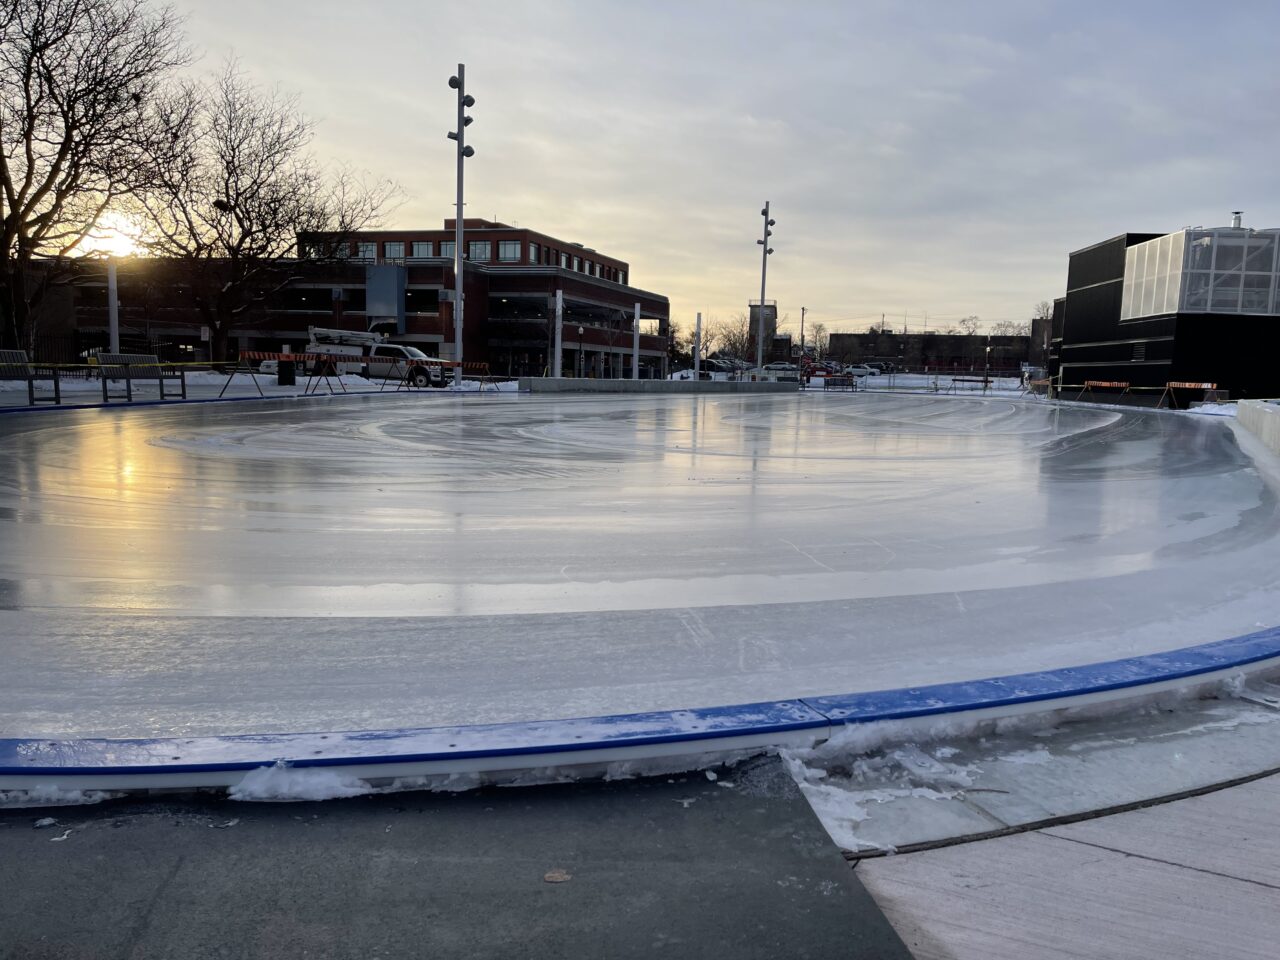 an image of an outdoor skating rink, at dusk, in a downtown setting